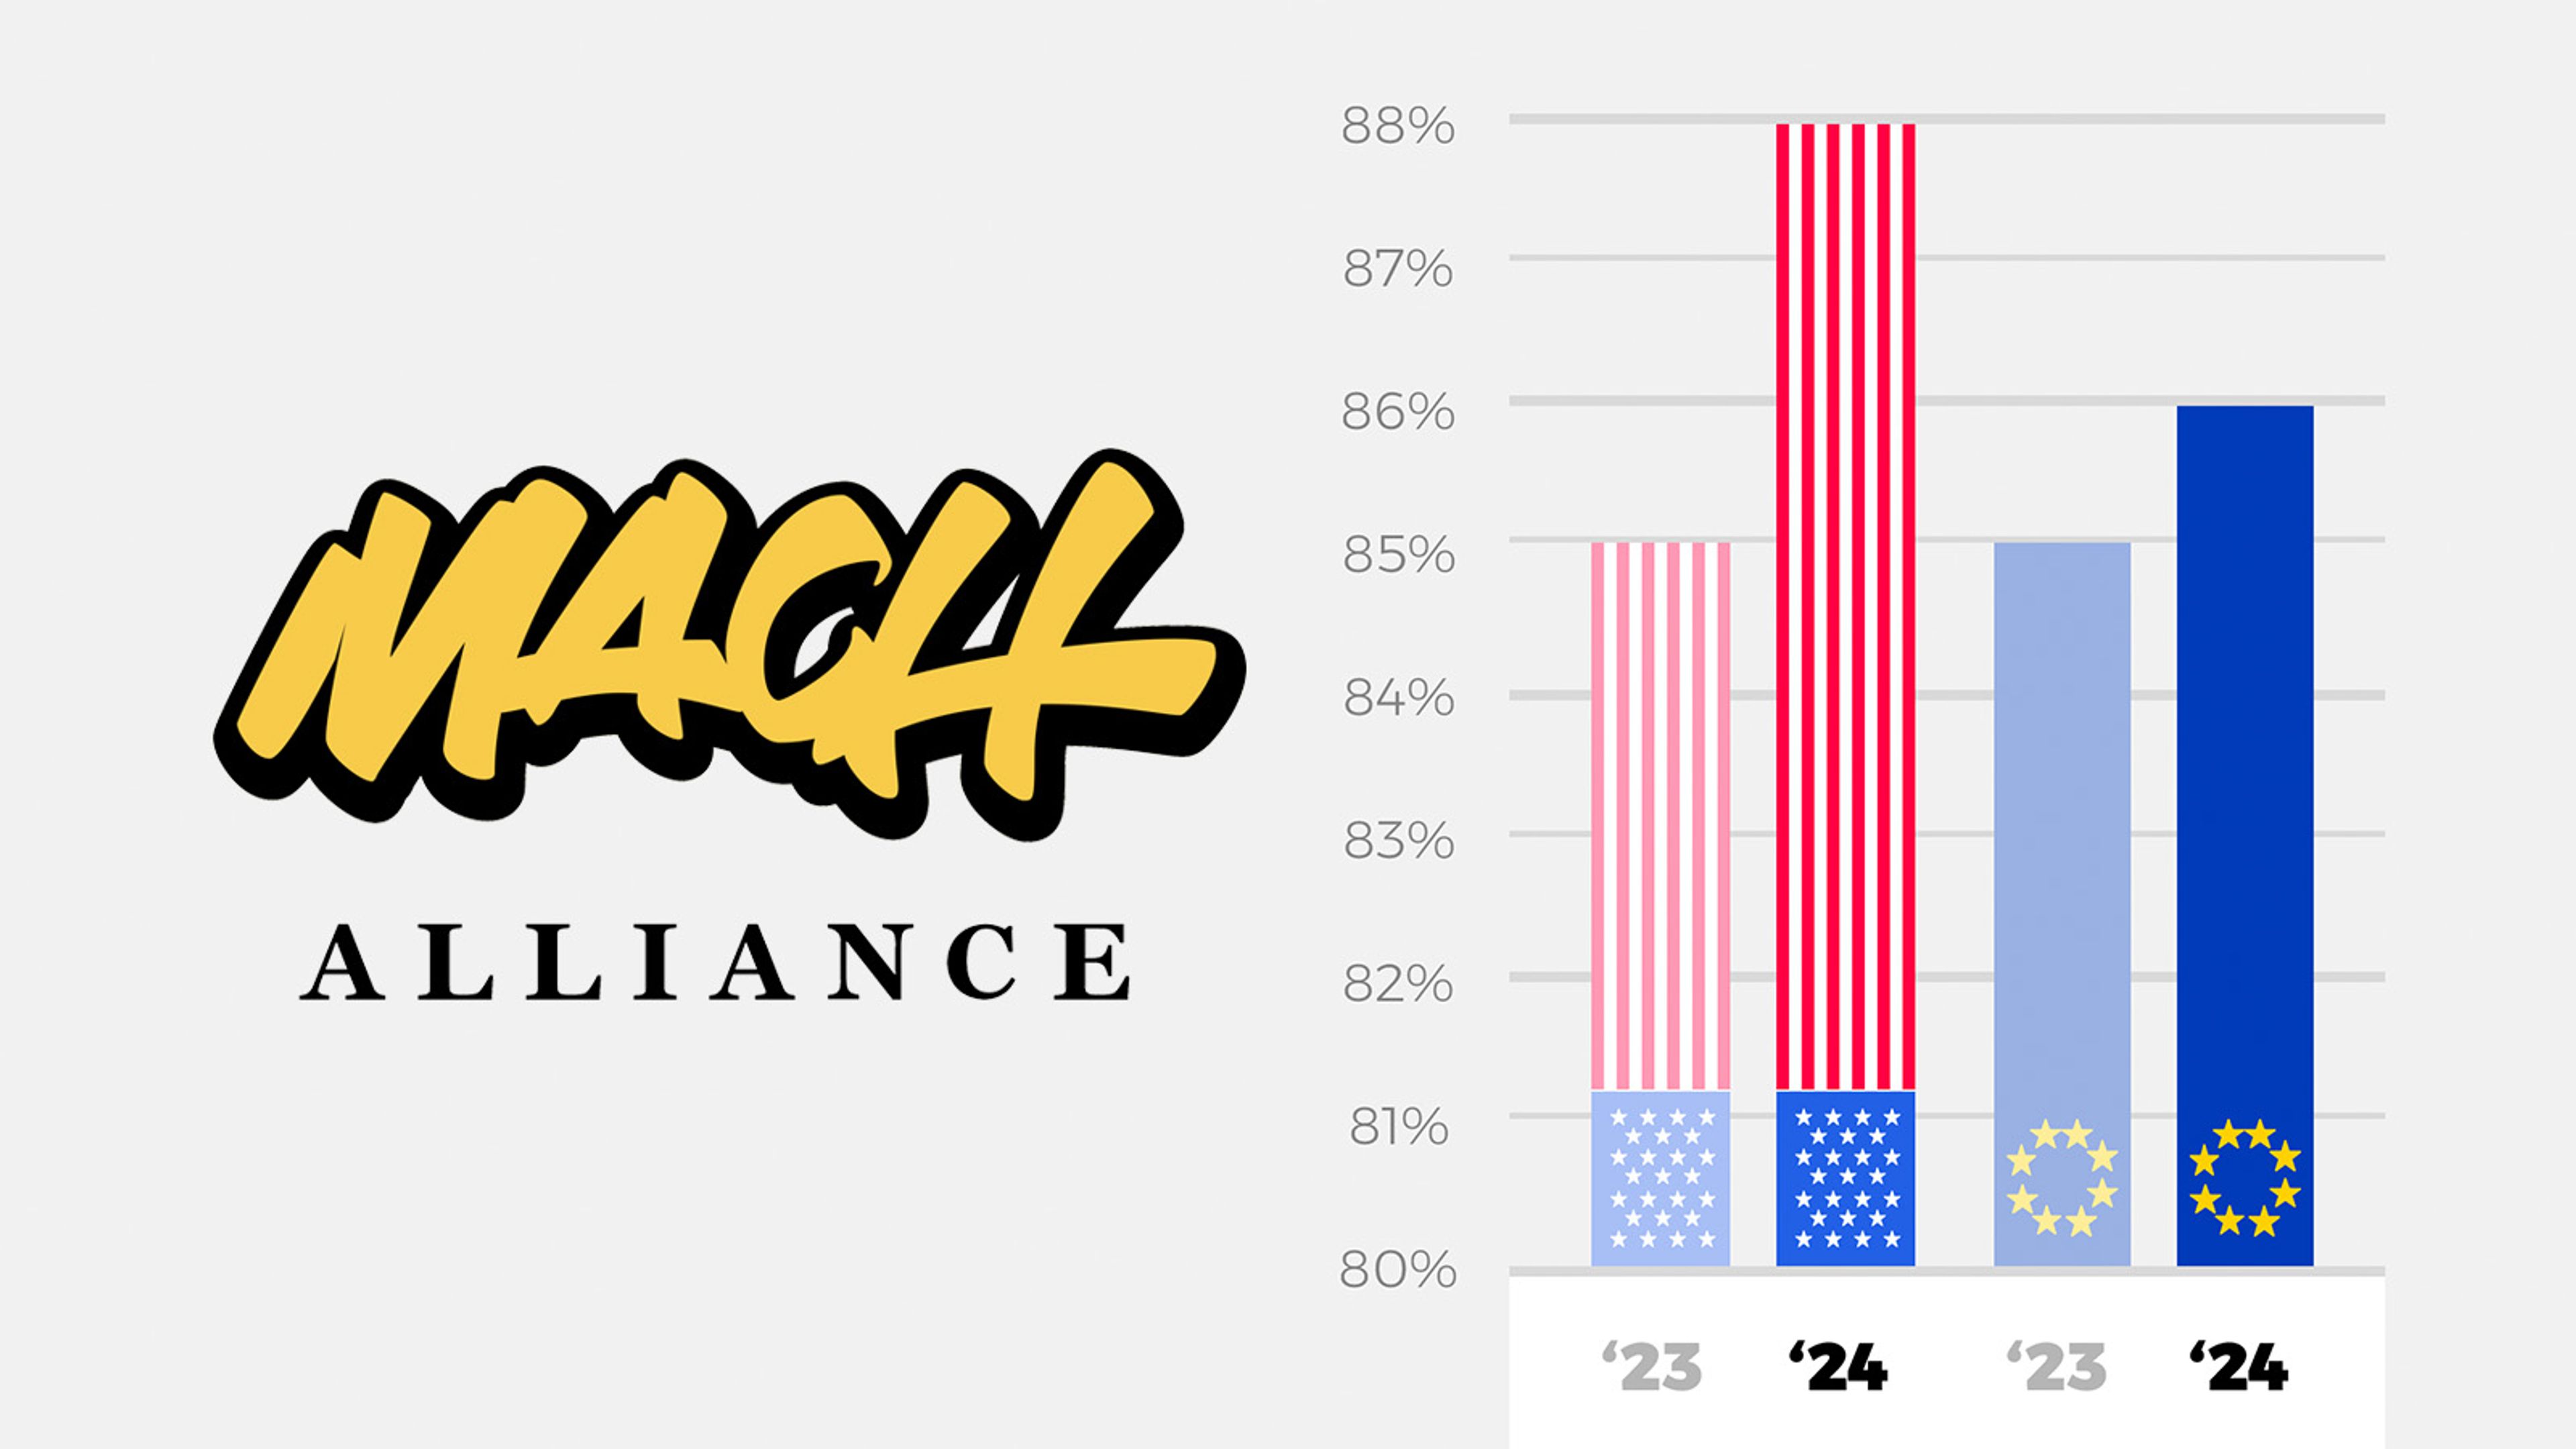 MACH Alliance logo with bar graph showing growth in the US and EU